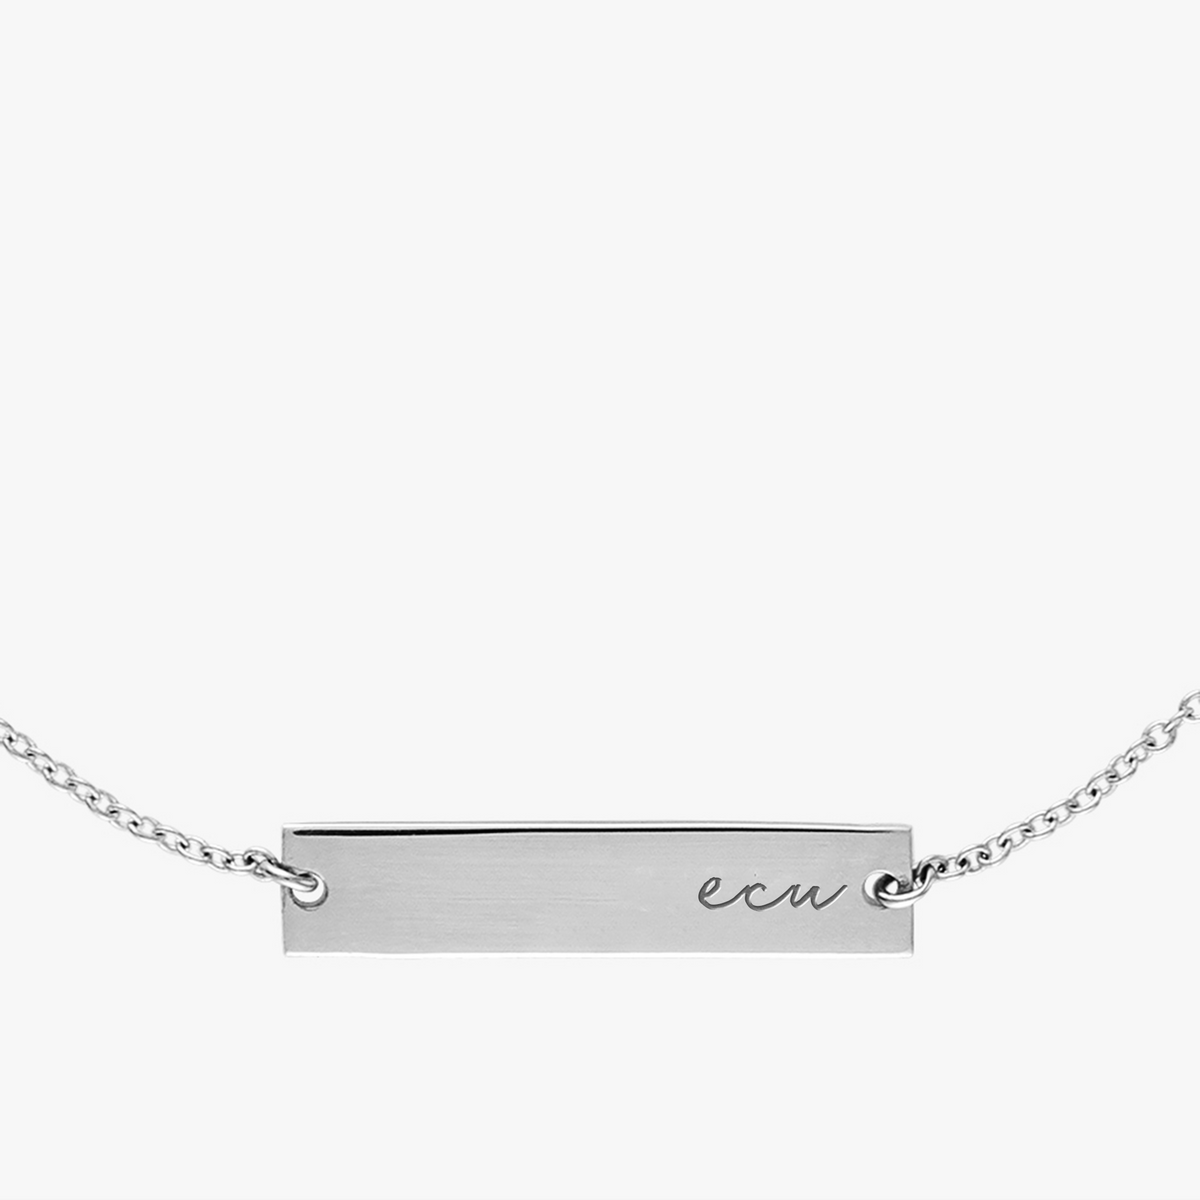 ECU Horizontal Necklace Sterling Silver Close Up